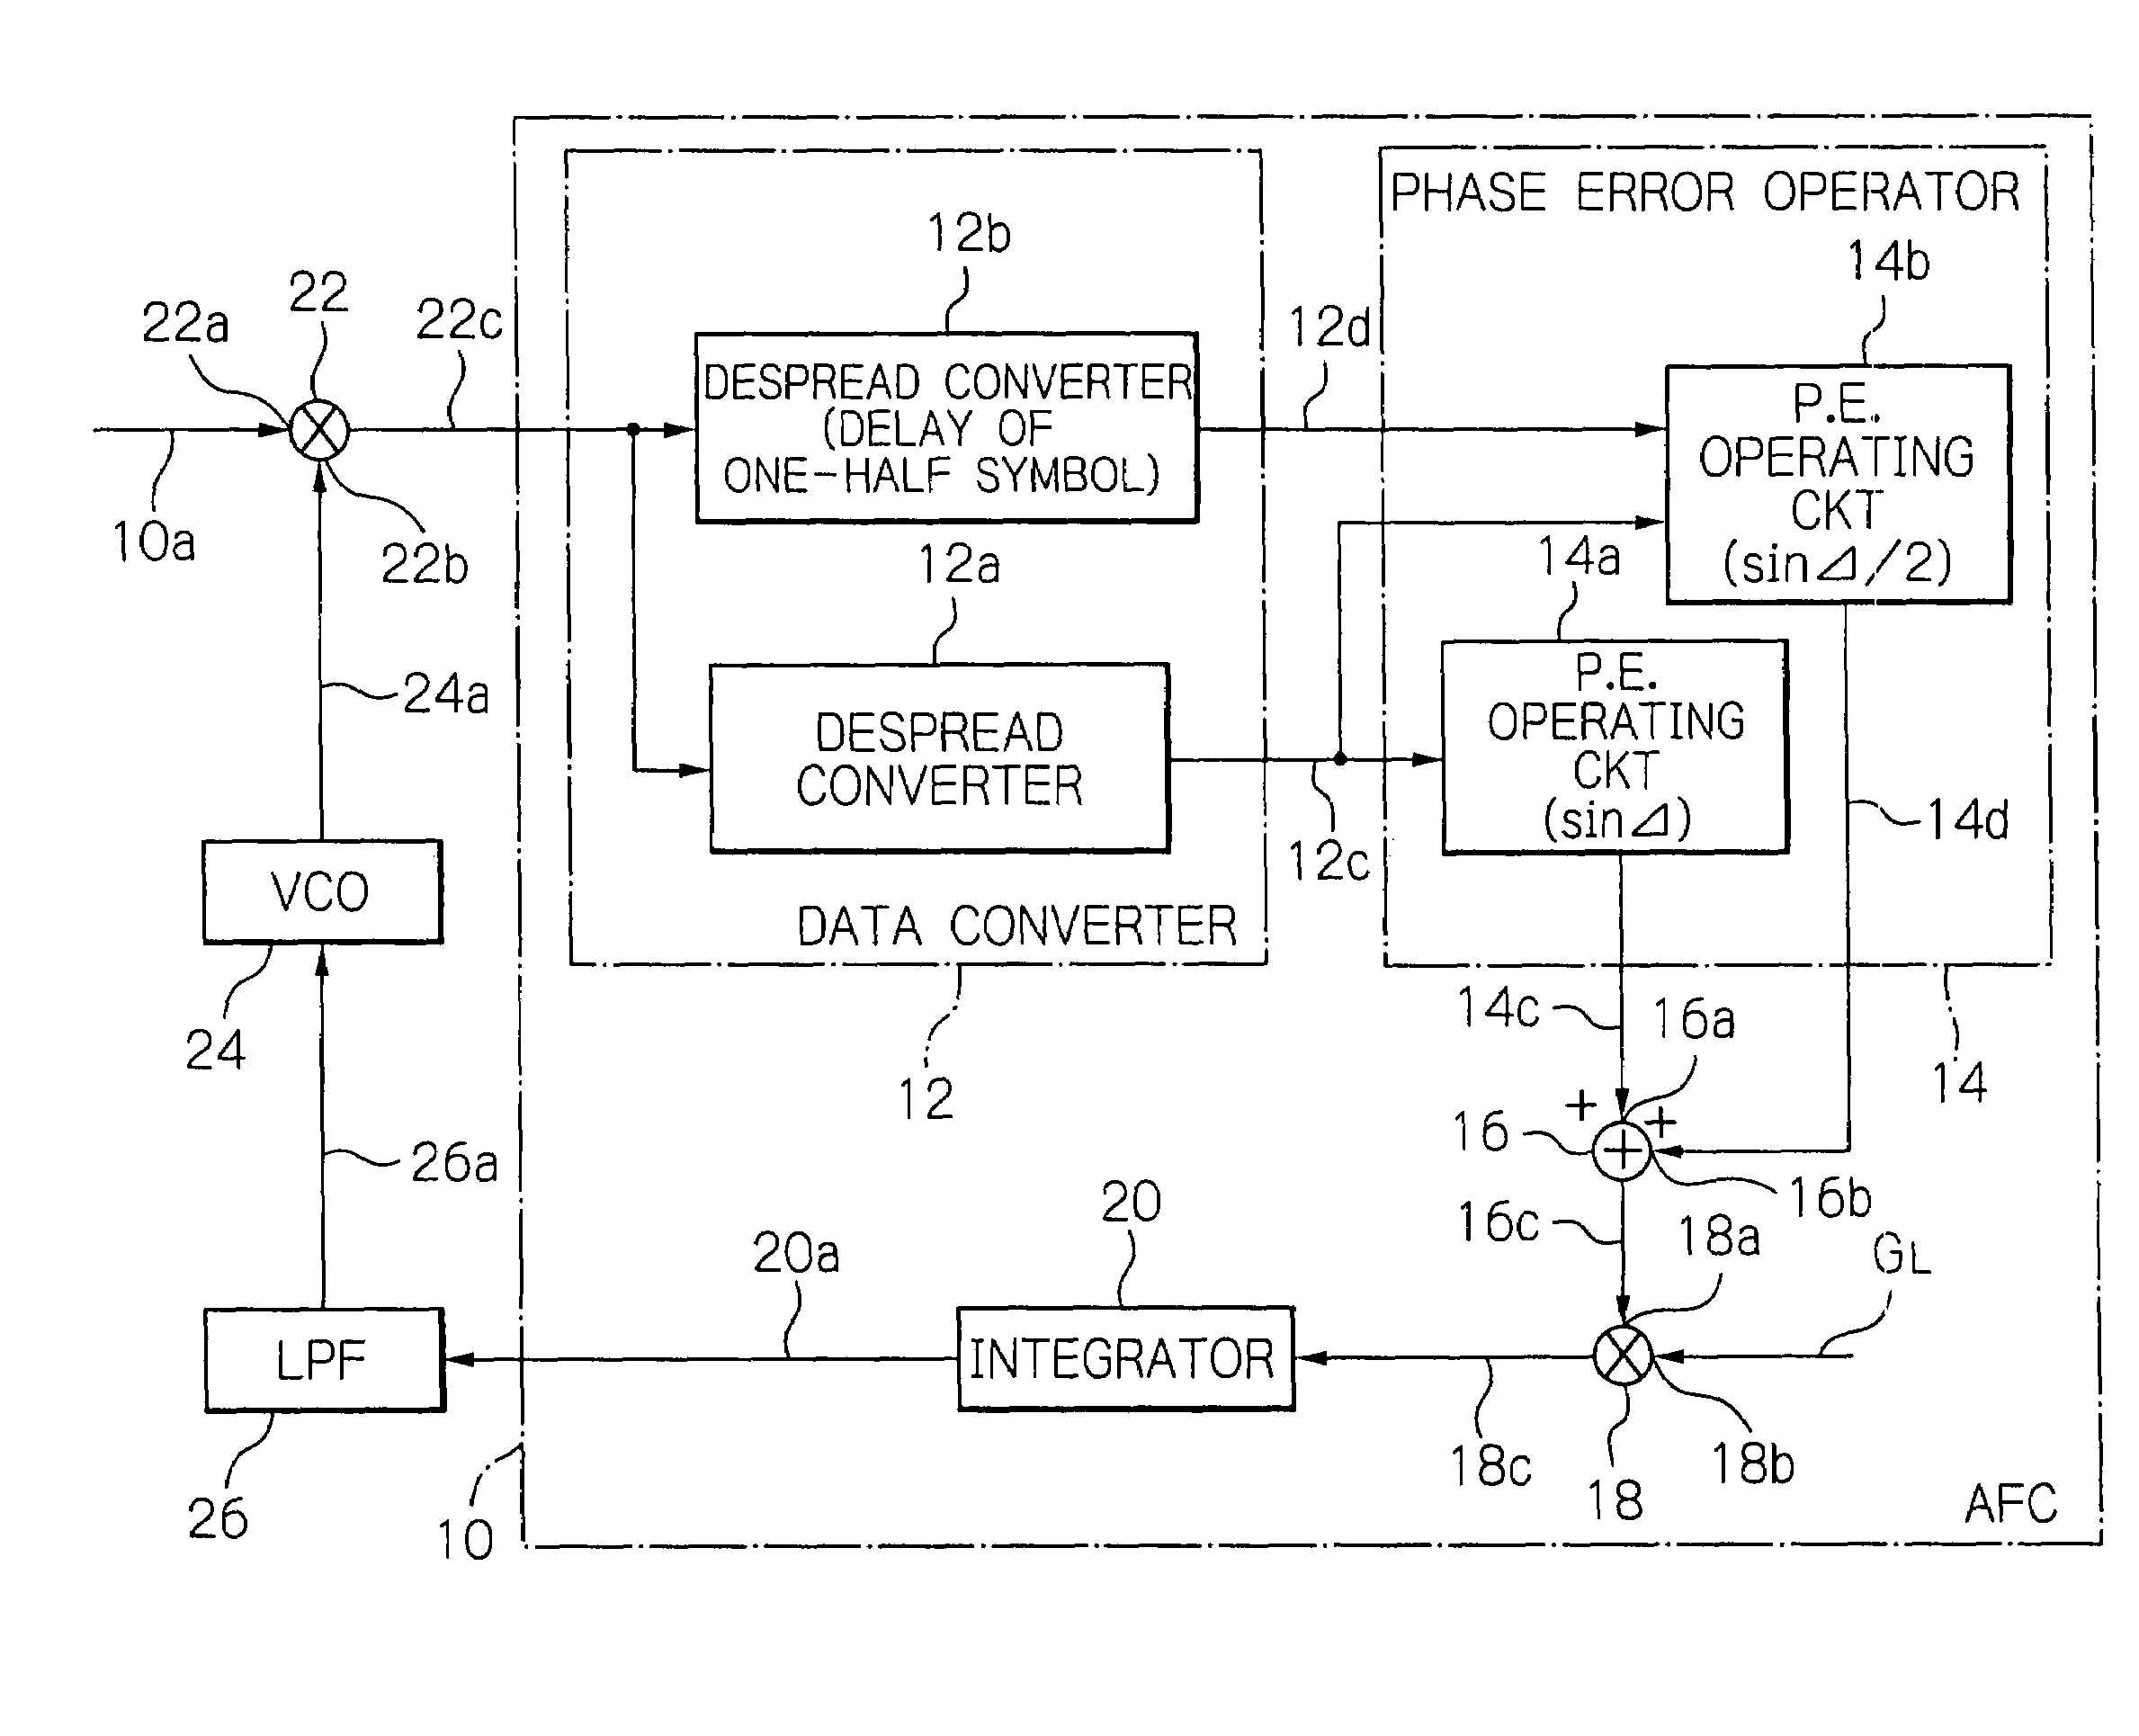 Apparatus for controlling the frequency of received signals to a predetermined frequency